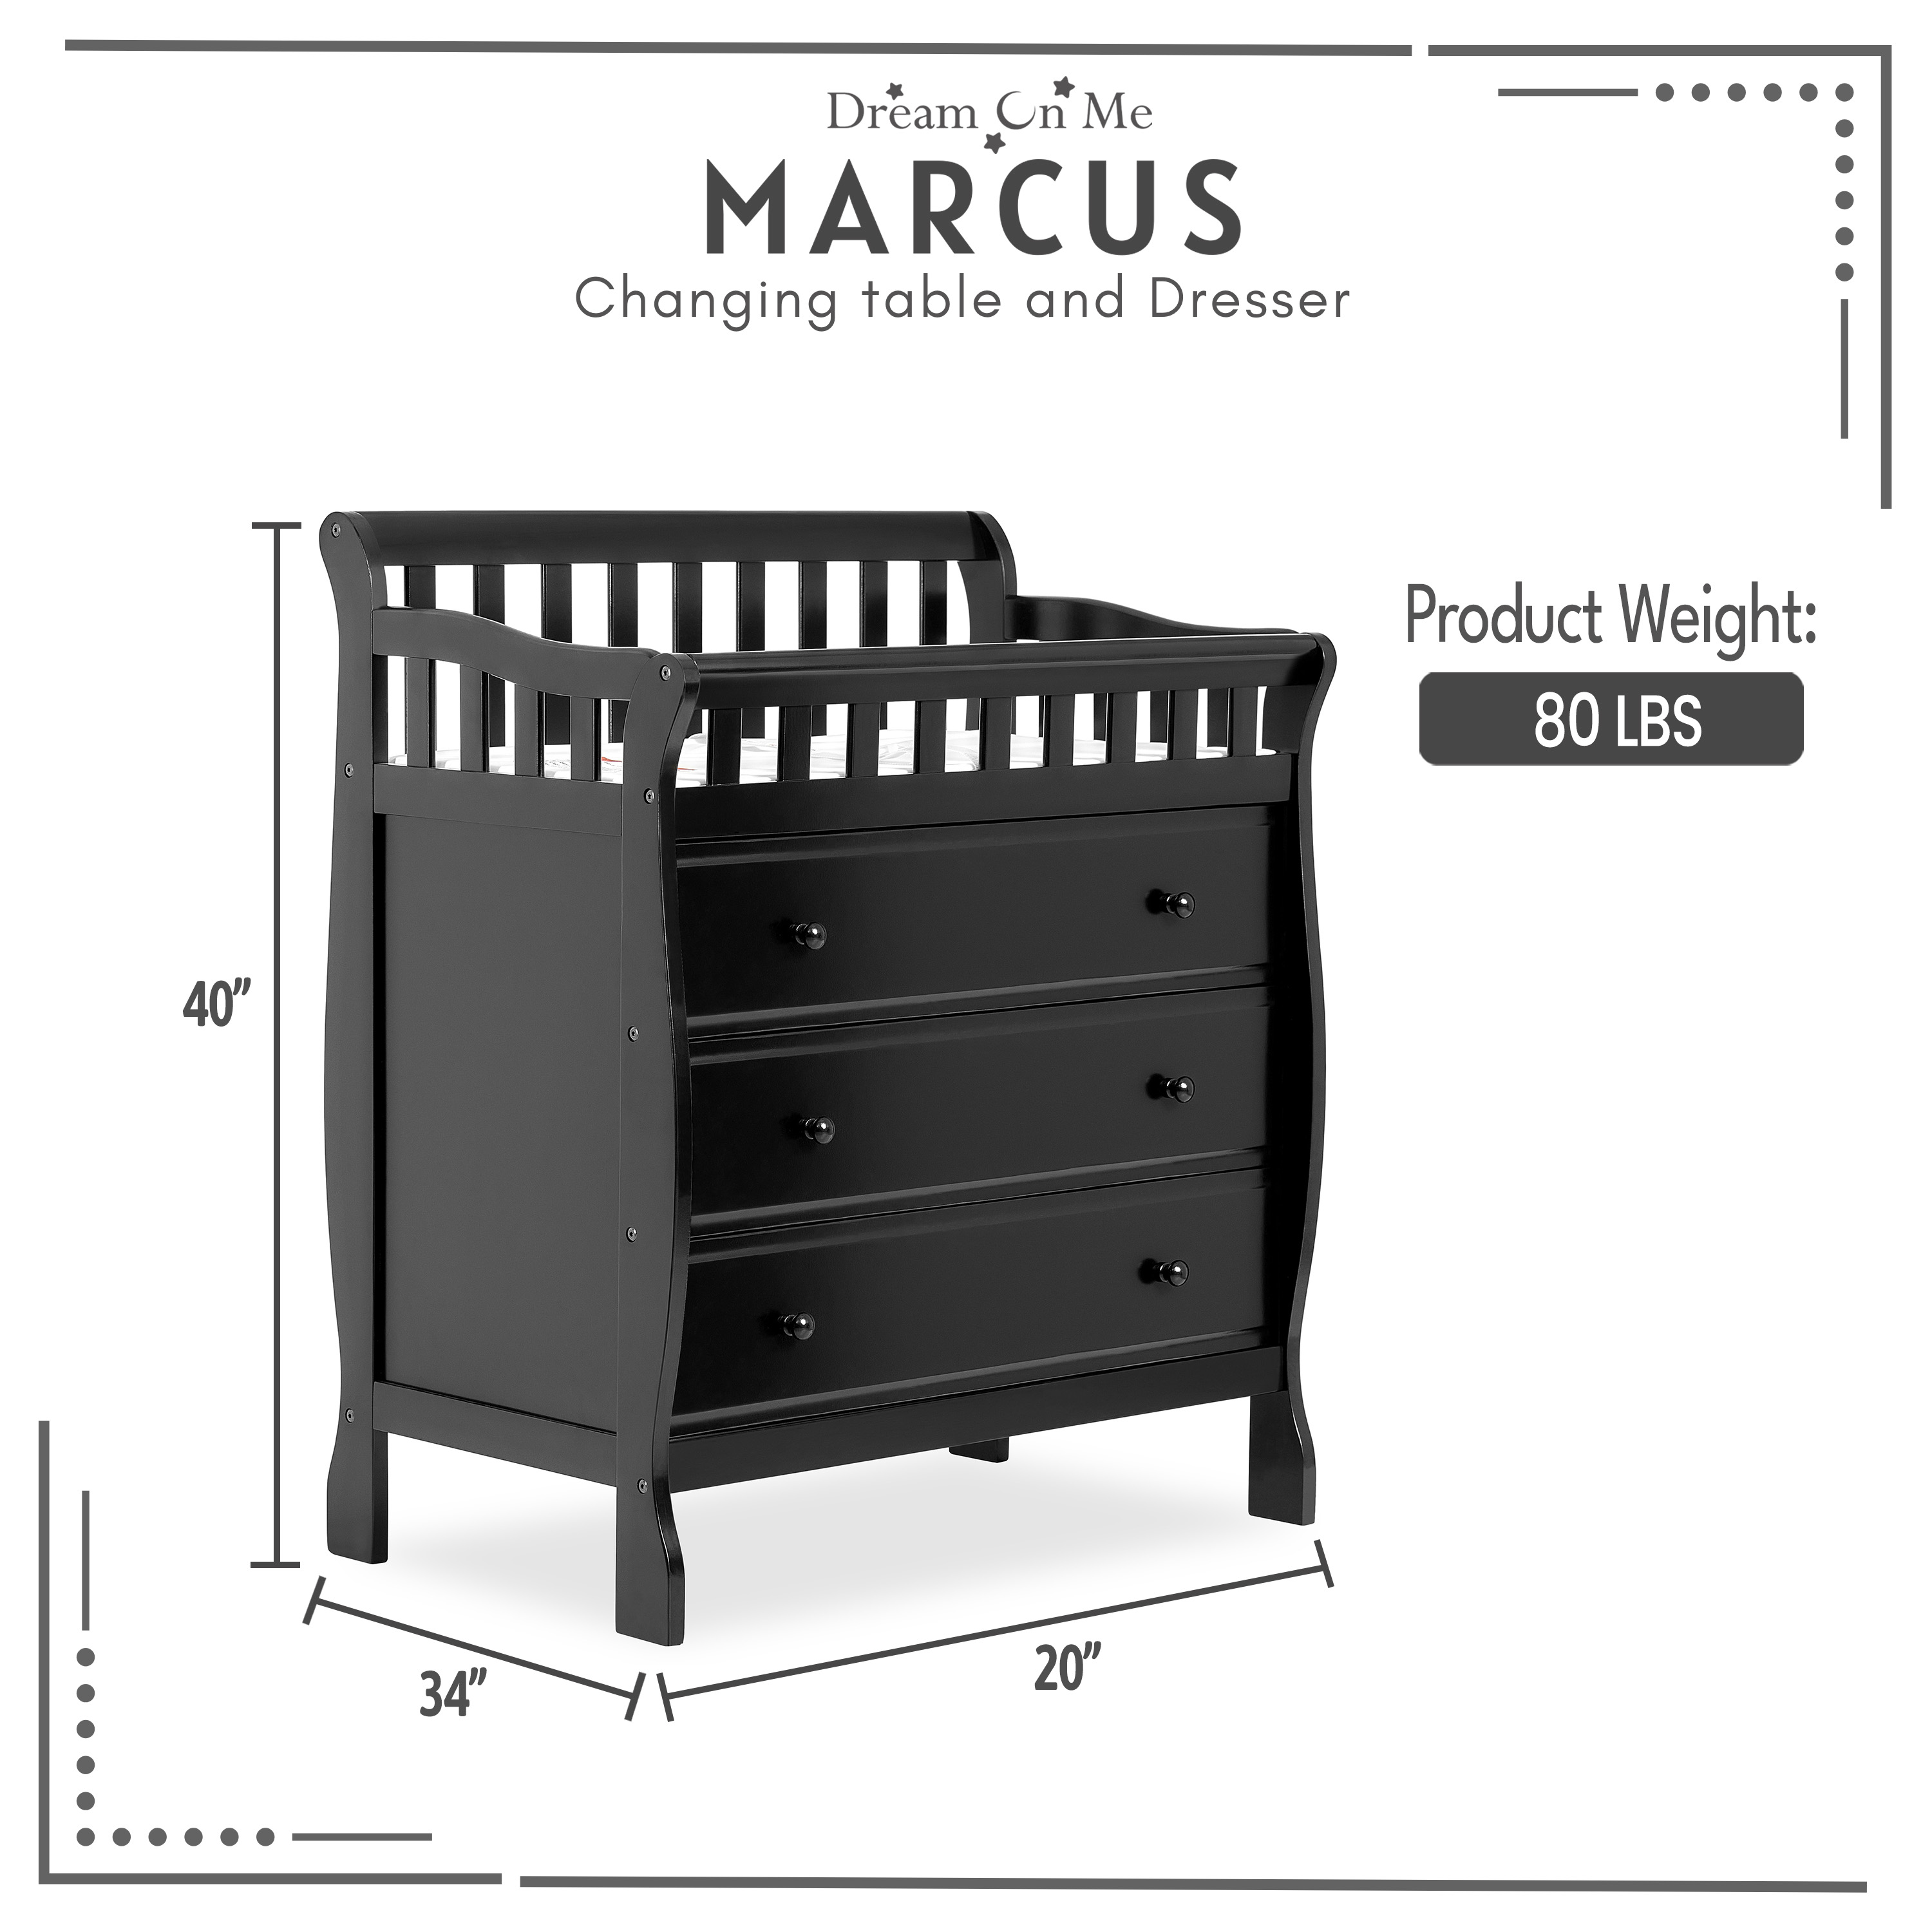 Dream On Me Marcus Changing Table And Dresser, Black - image 4 of 10